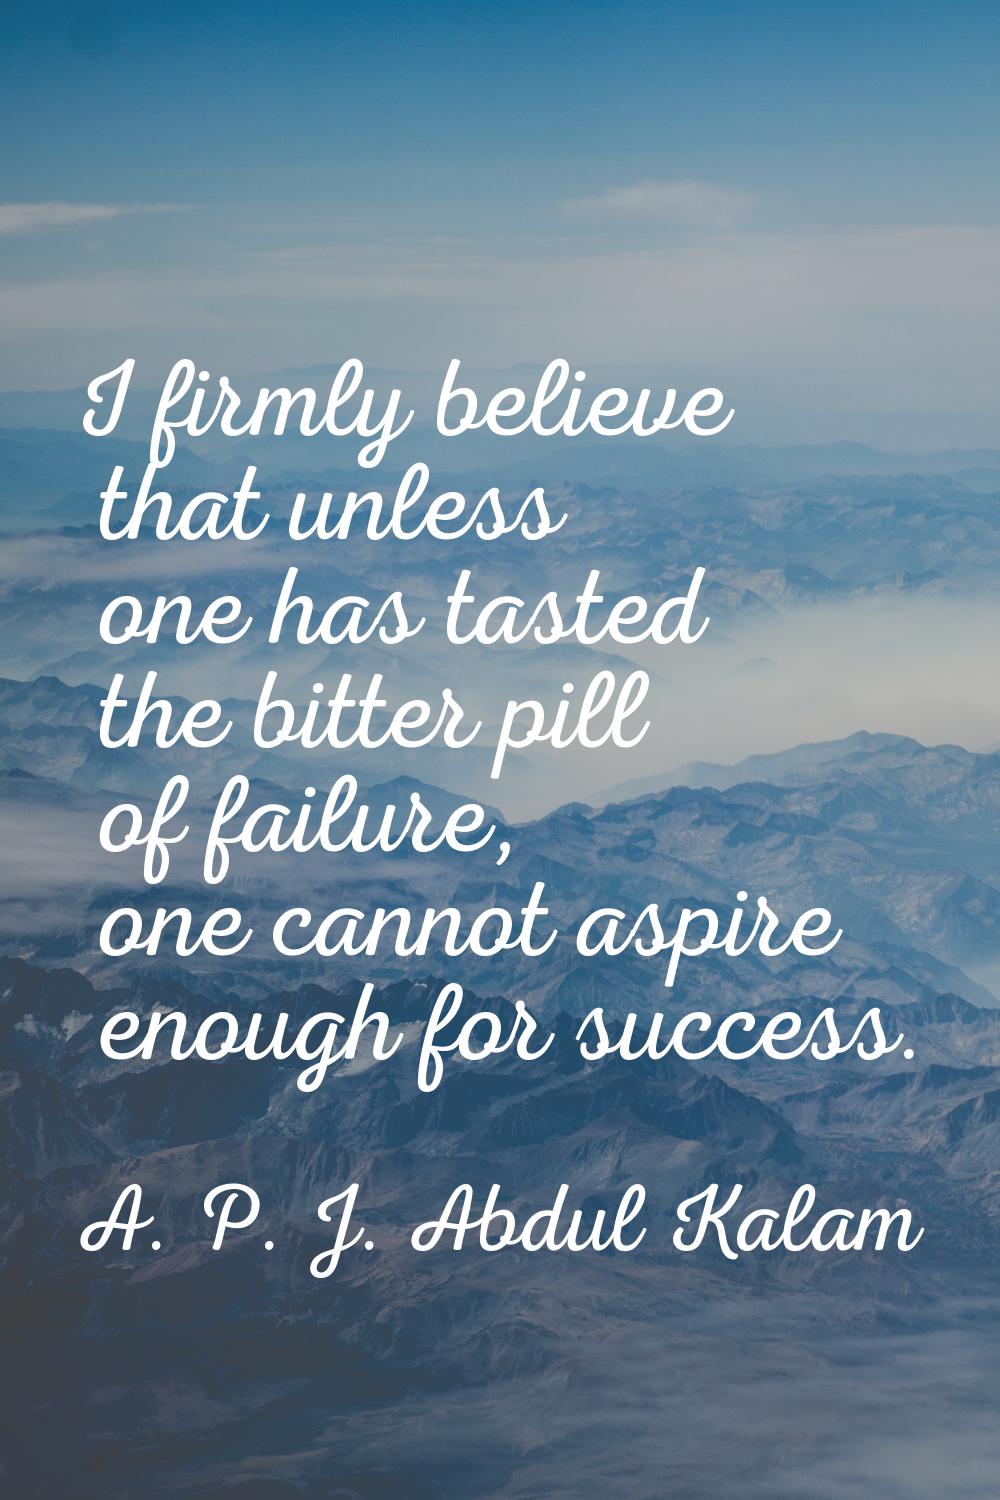 I firmly believe that unless one has tasted the bitter pill of failure, one cannot aspire enough fo